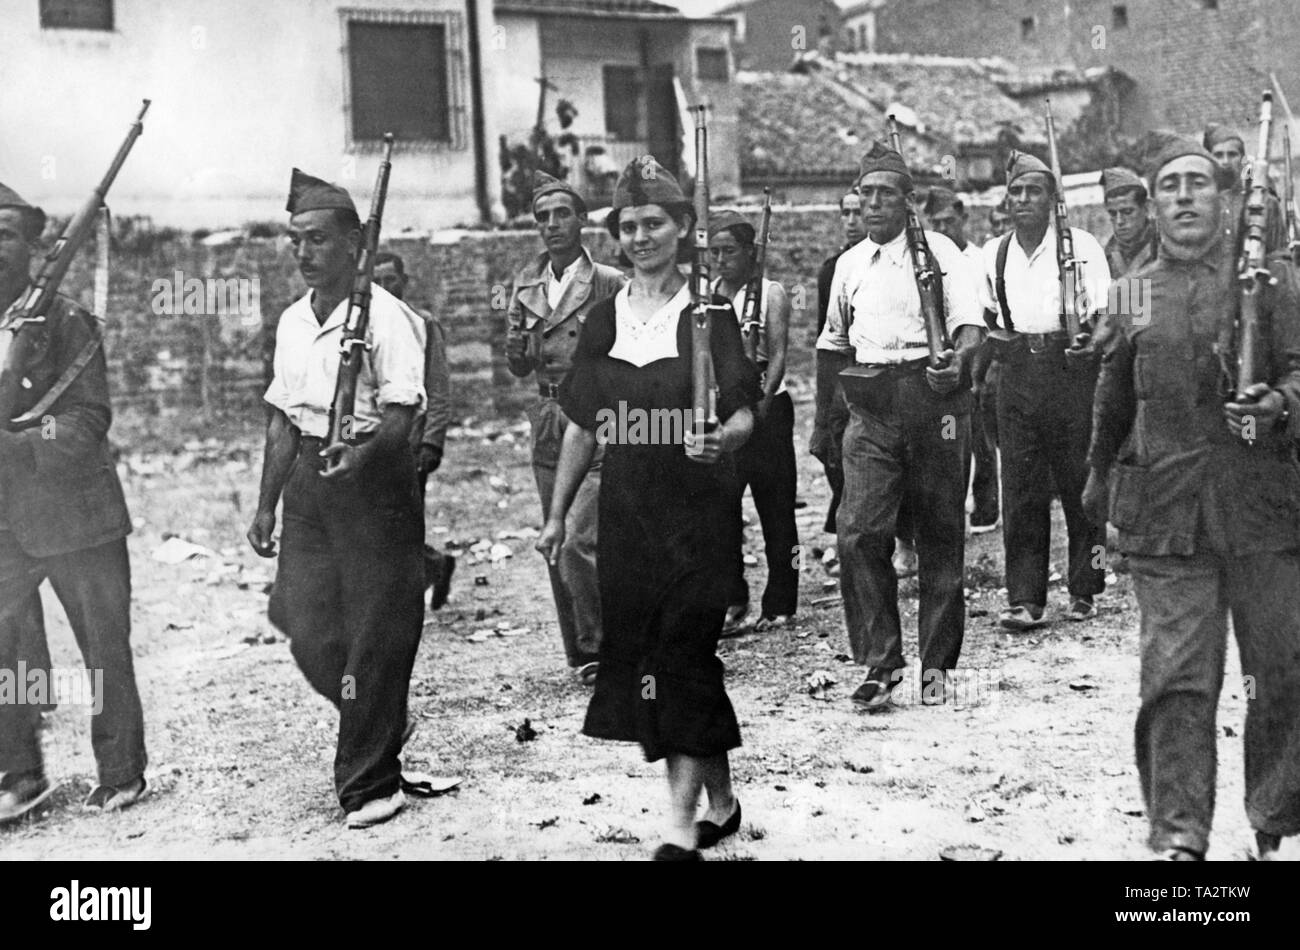 Photo of a unit of volunteer Republican militiamen with shouldered carabiners during the Spanish Civil War in 1936. In the center, a female fighter in a dress with the typical military Gorillo cap. The soldiers wear alpargatas, light cotton shoes with braided hemp soles. Stock Photo